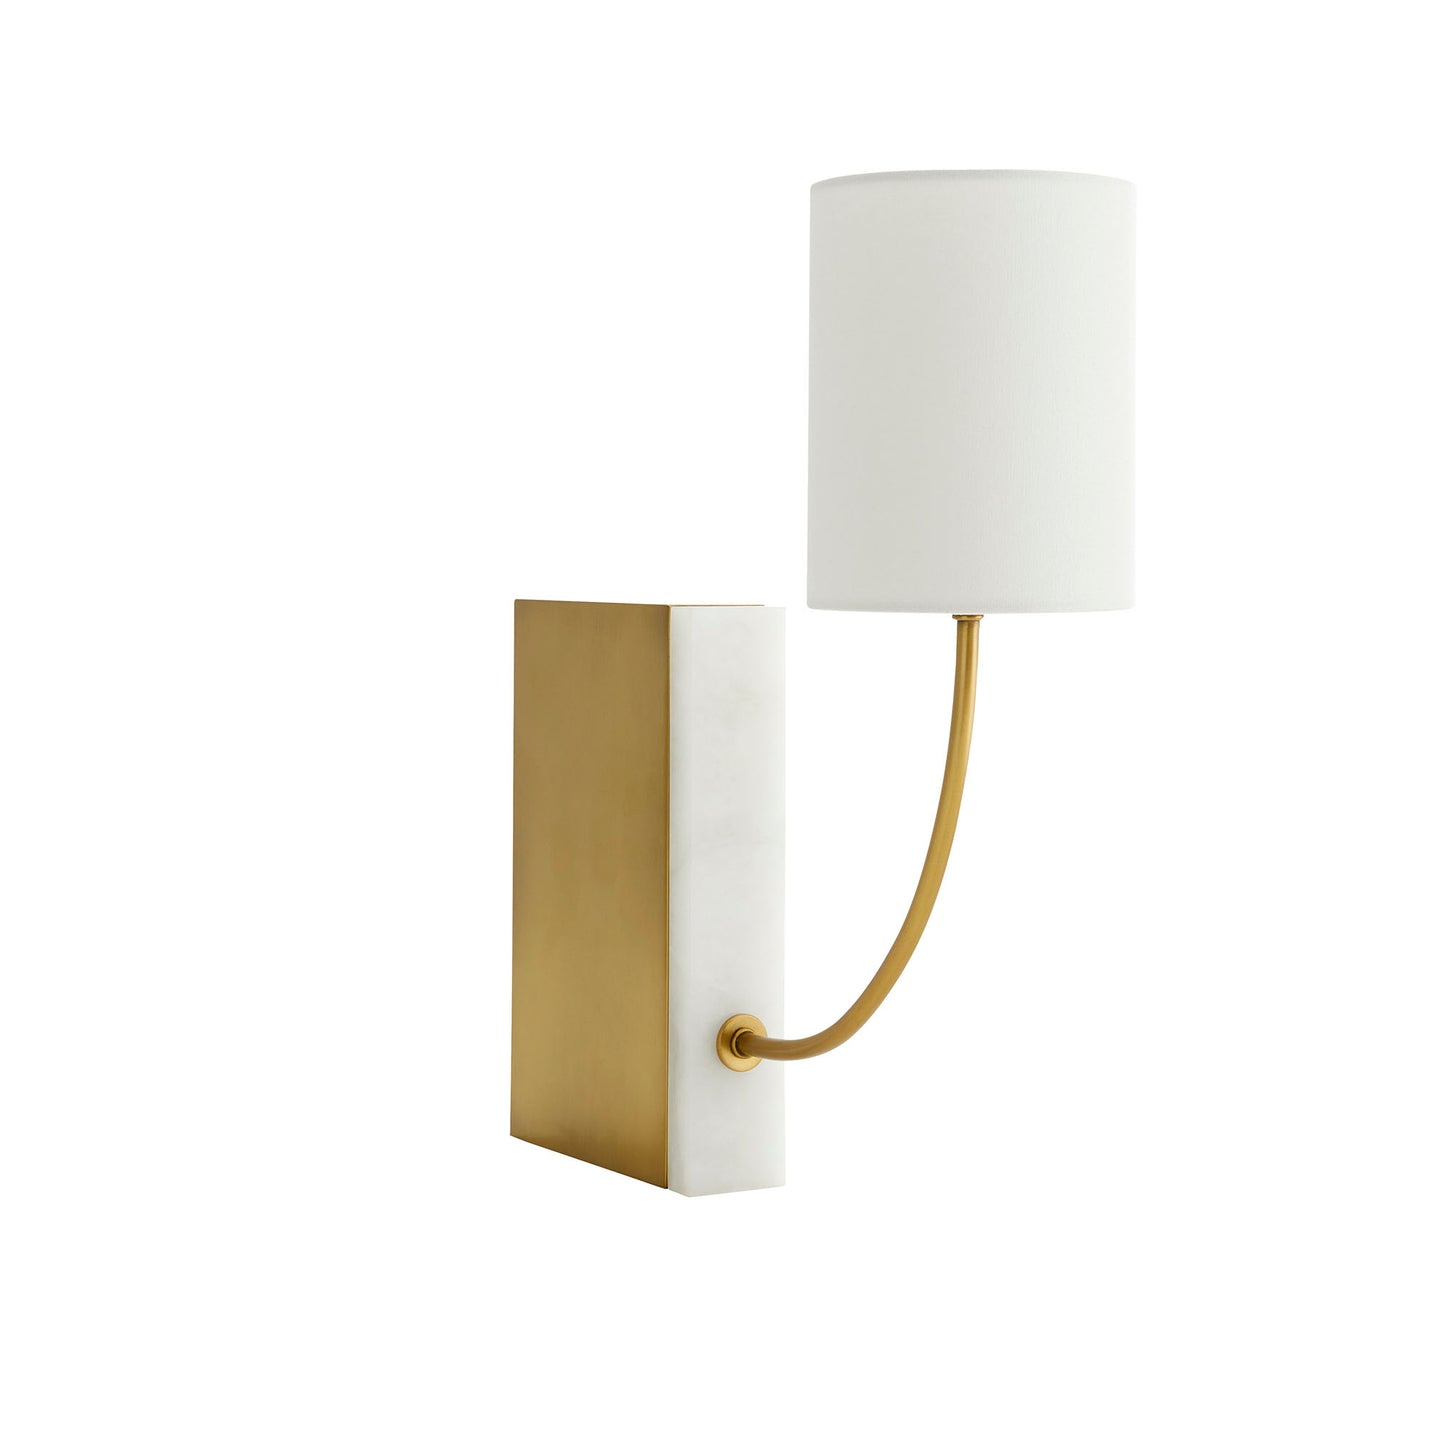 The Flynn Sconce - Antique Brass and White Alabaster with Linen Shade